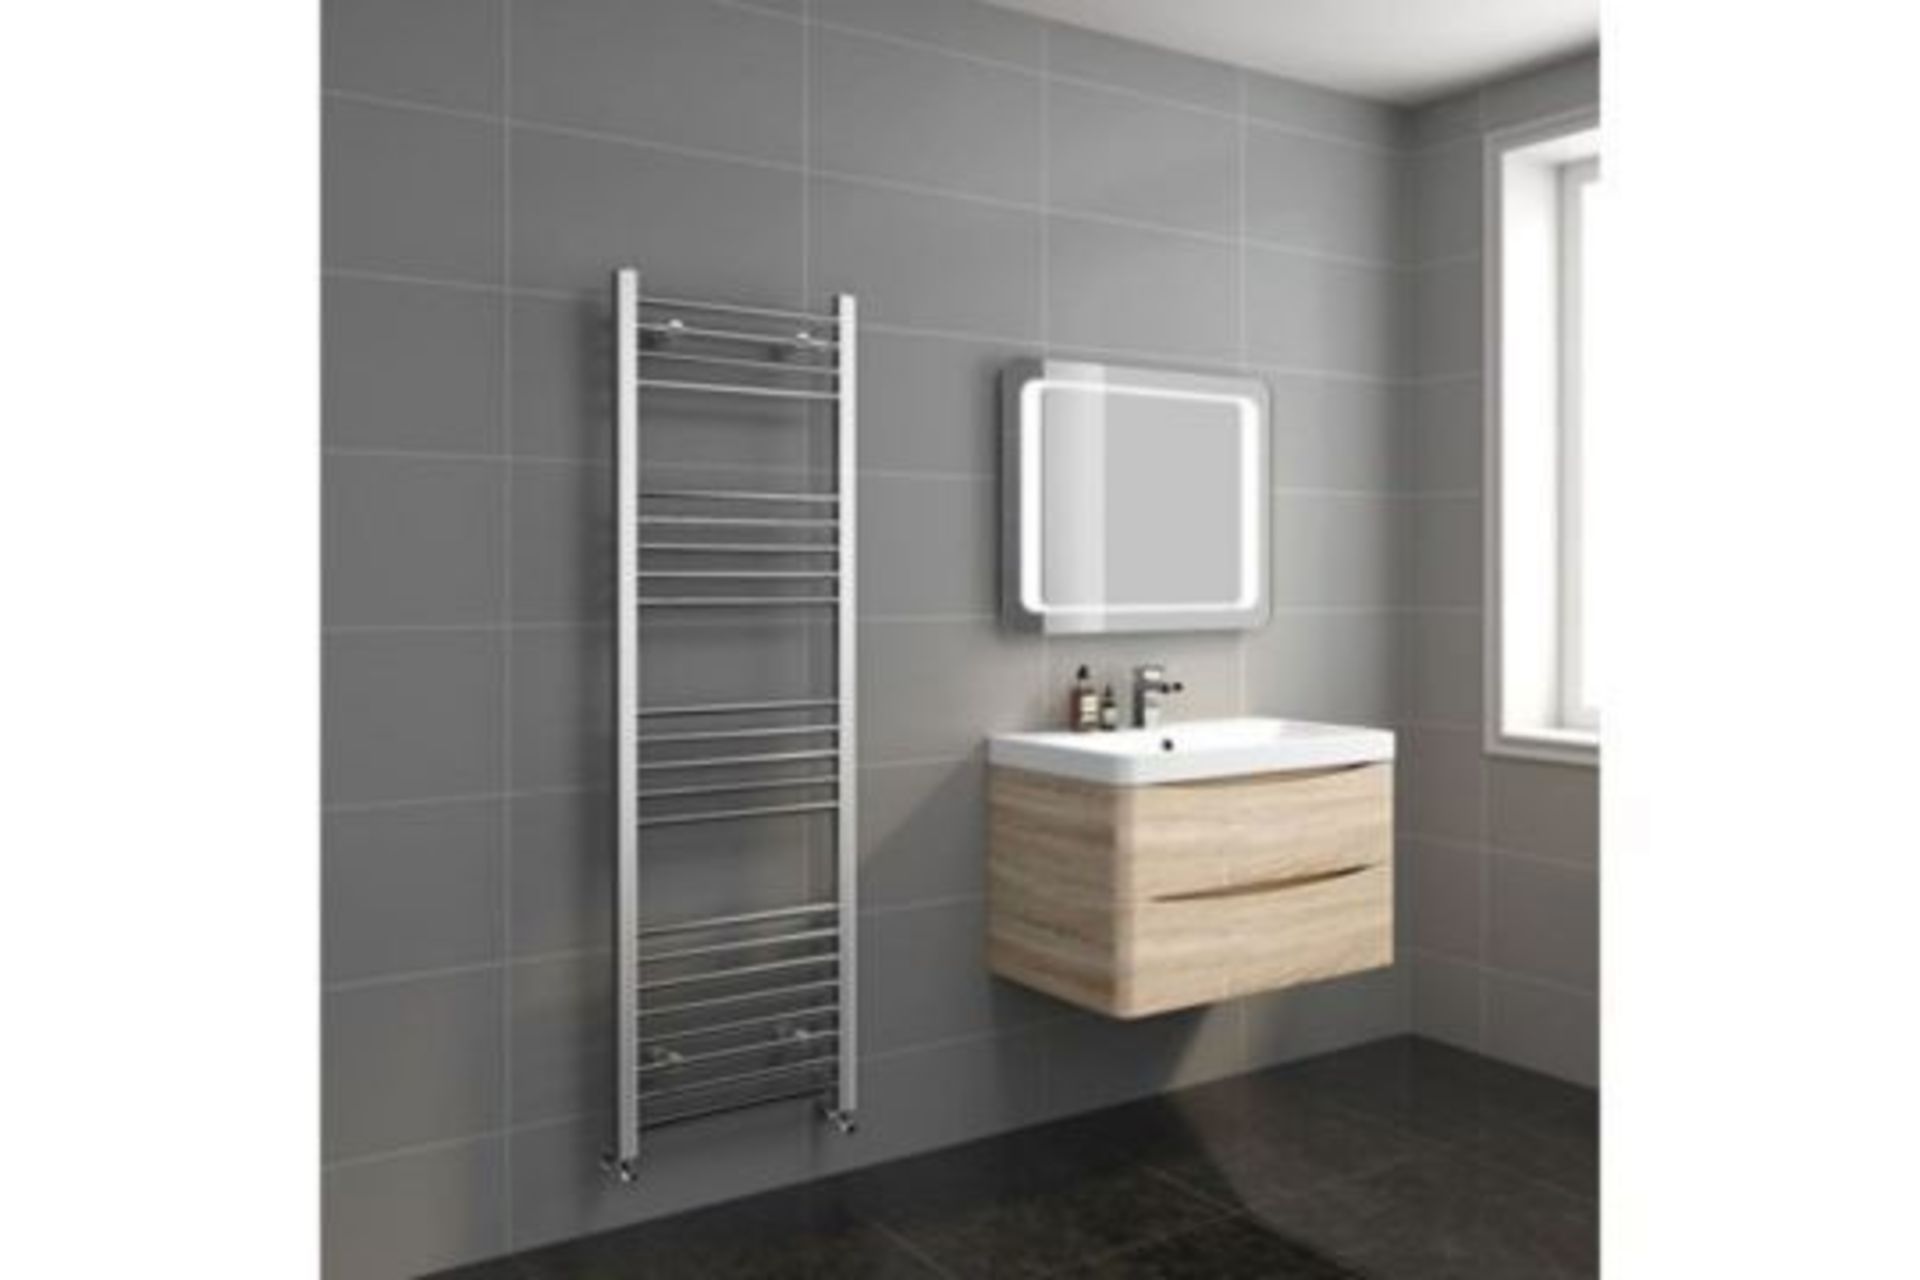 New 1600x500 mm - 20 mm Tubes - Chrome Flat Rail Ladder Towel Radiator.Ns1600500.Made From Chrome... - Image 2 of 2